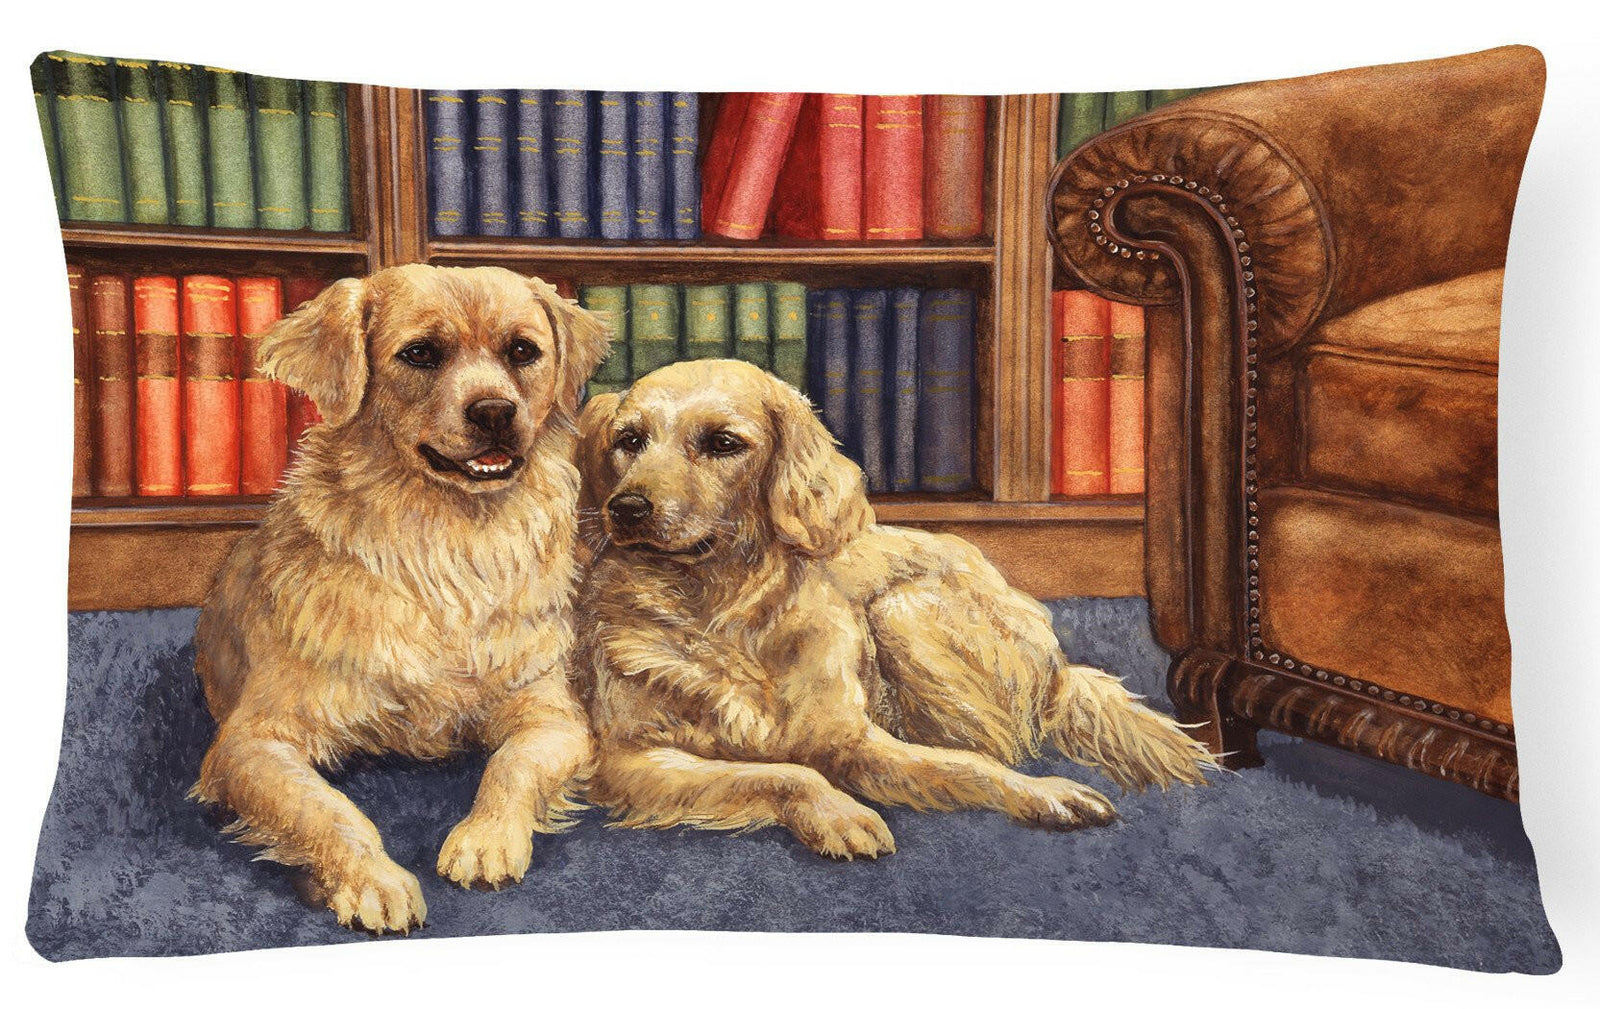 Golden Retrievers in the Library Fabric Decorative Pillow BDBA0289PW1216 by Caroline's Treasures